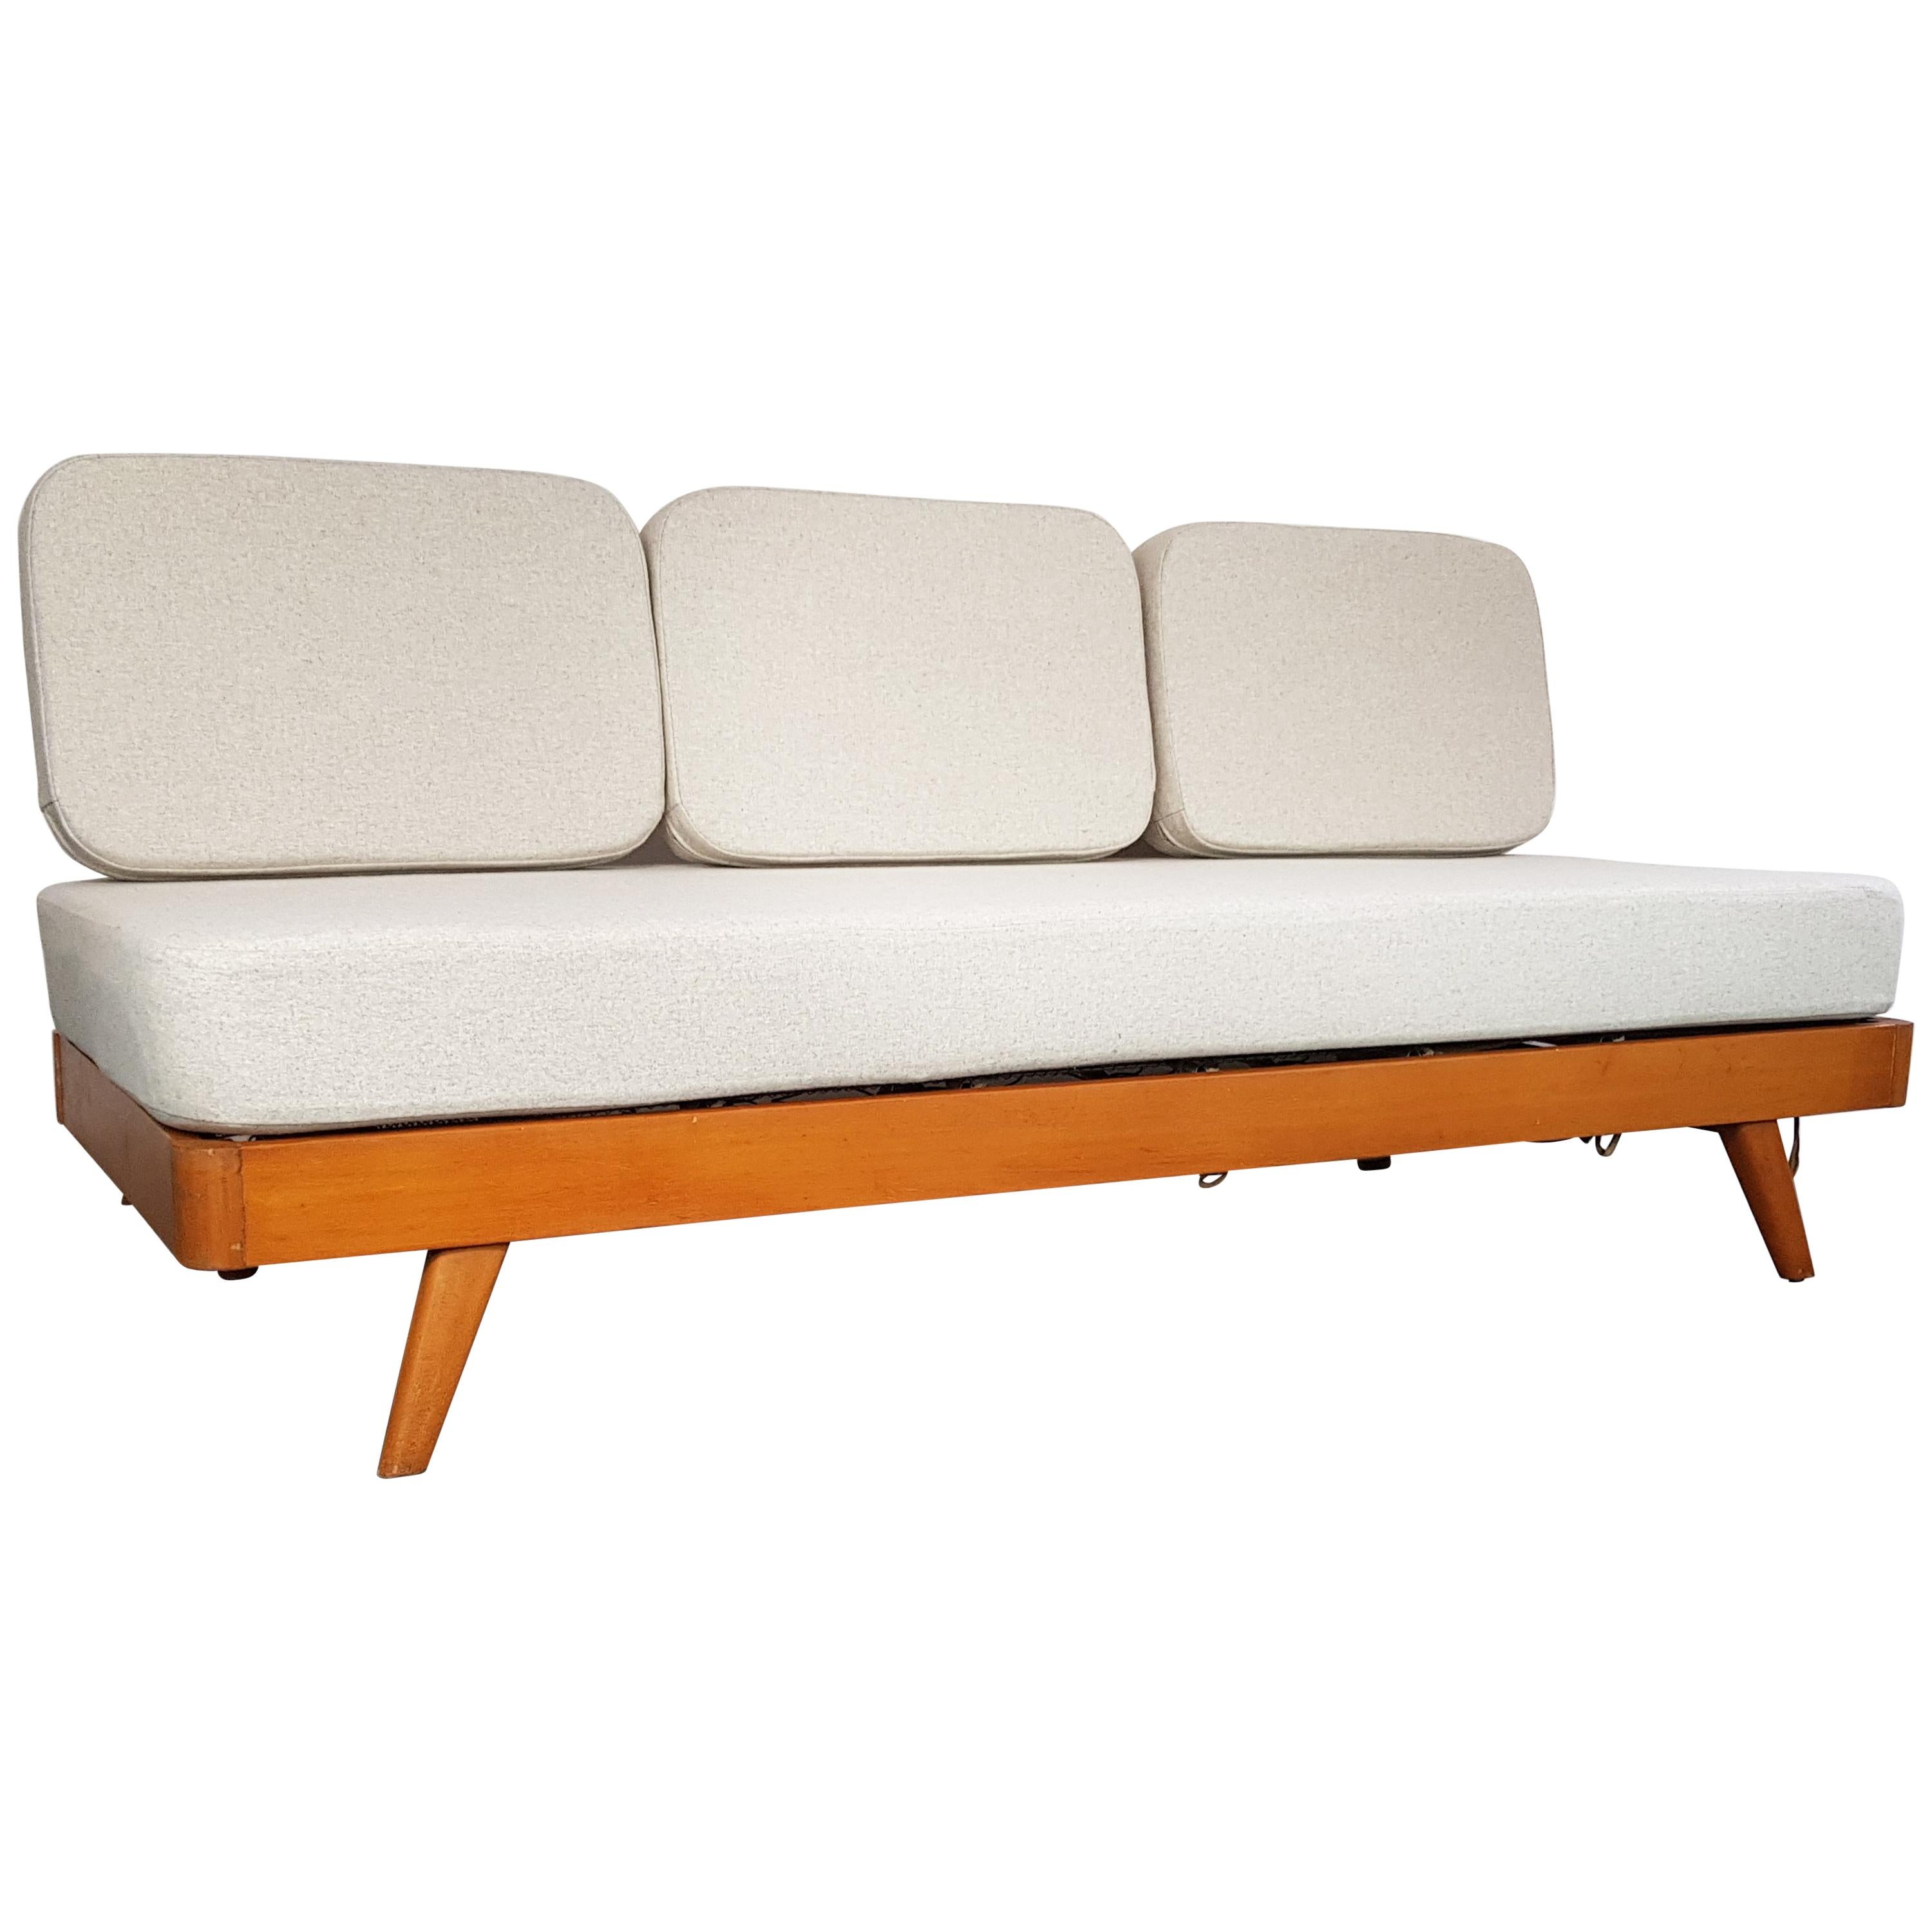 Vintage Danish Midcentury Three-Seat Daybed For Sale